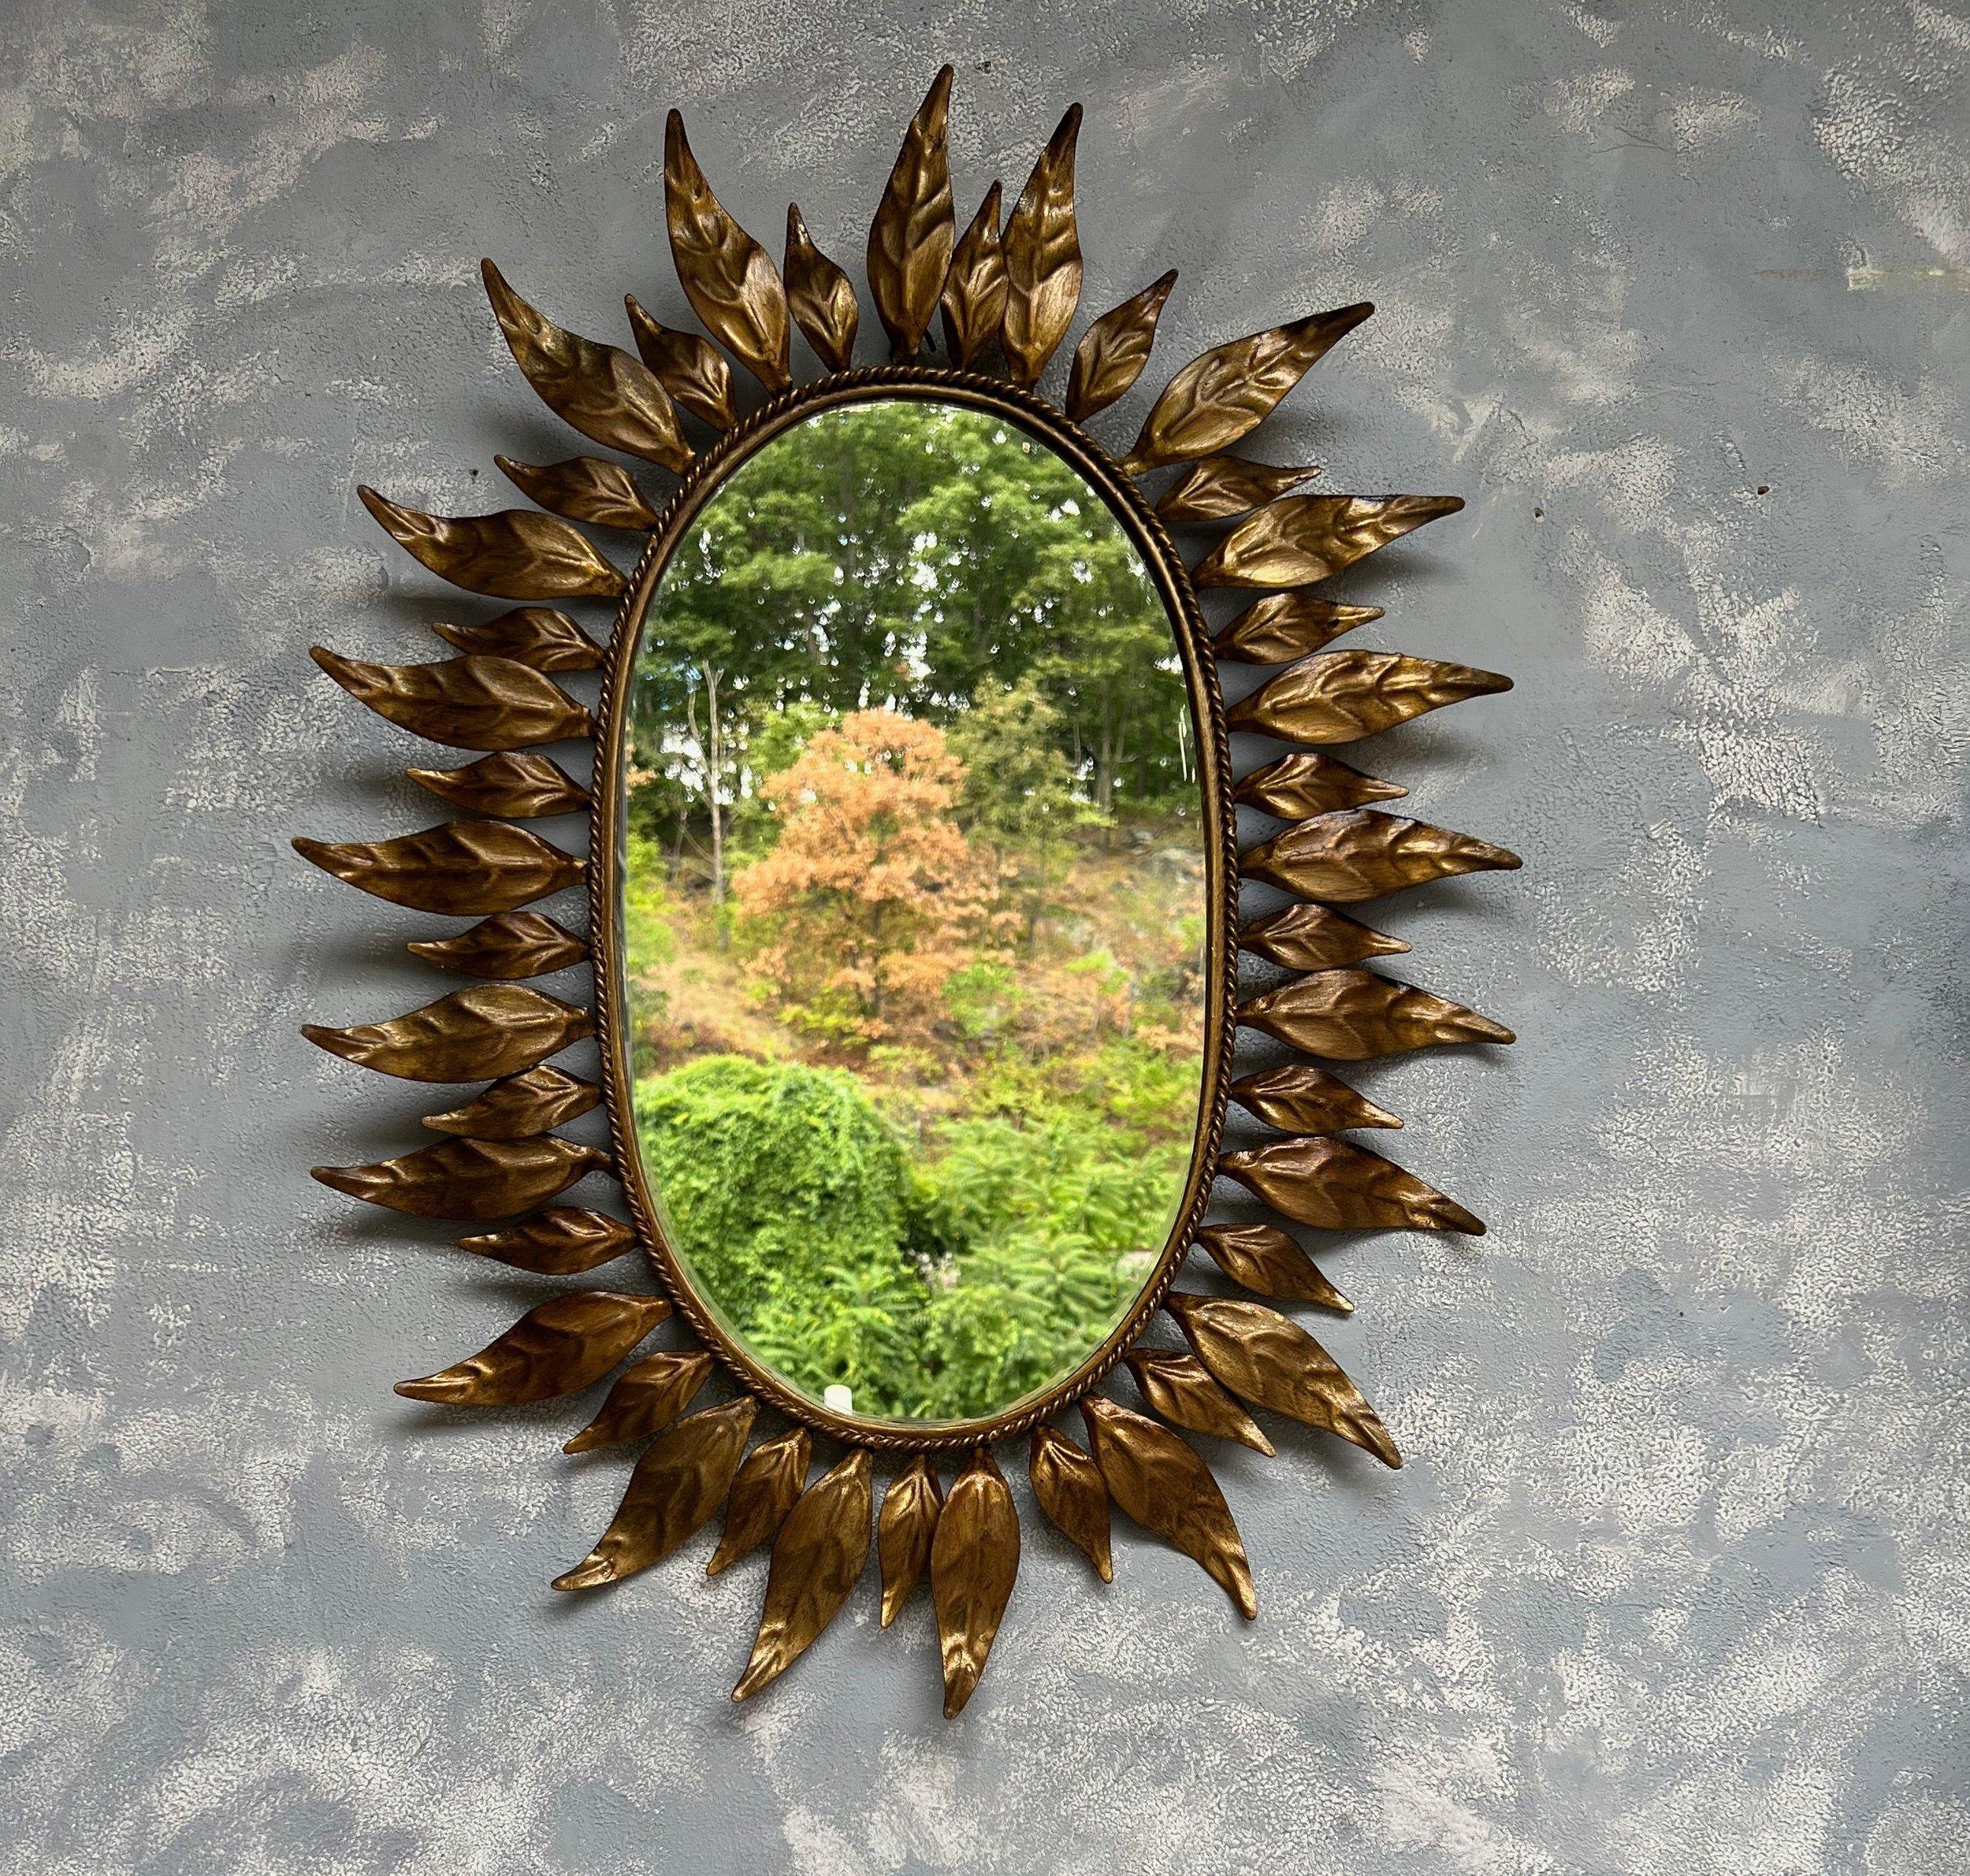 This oval gilt metal mirror offers a distinct and captivating design. The mirror features a combination of large and small leaves or rays encircling a finely braided interior frame. The metal itself boasts a lustrous gilt patina, adding a touch of